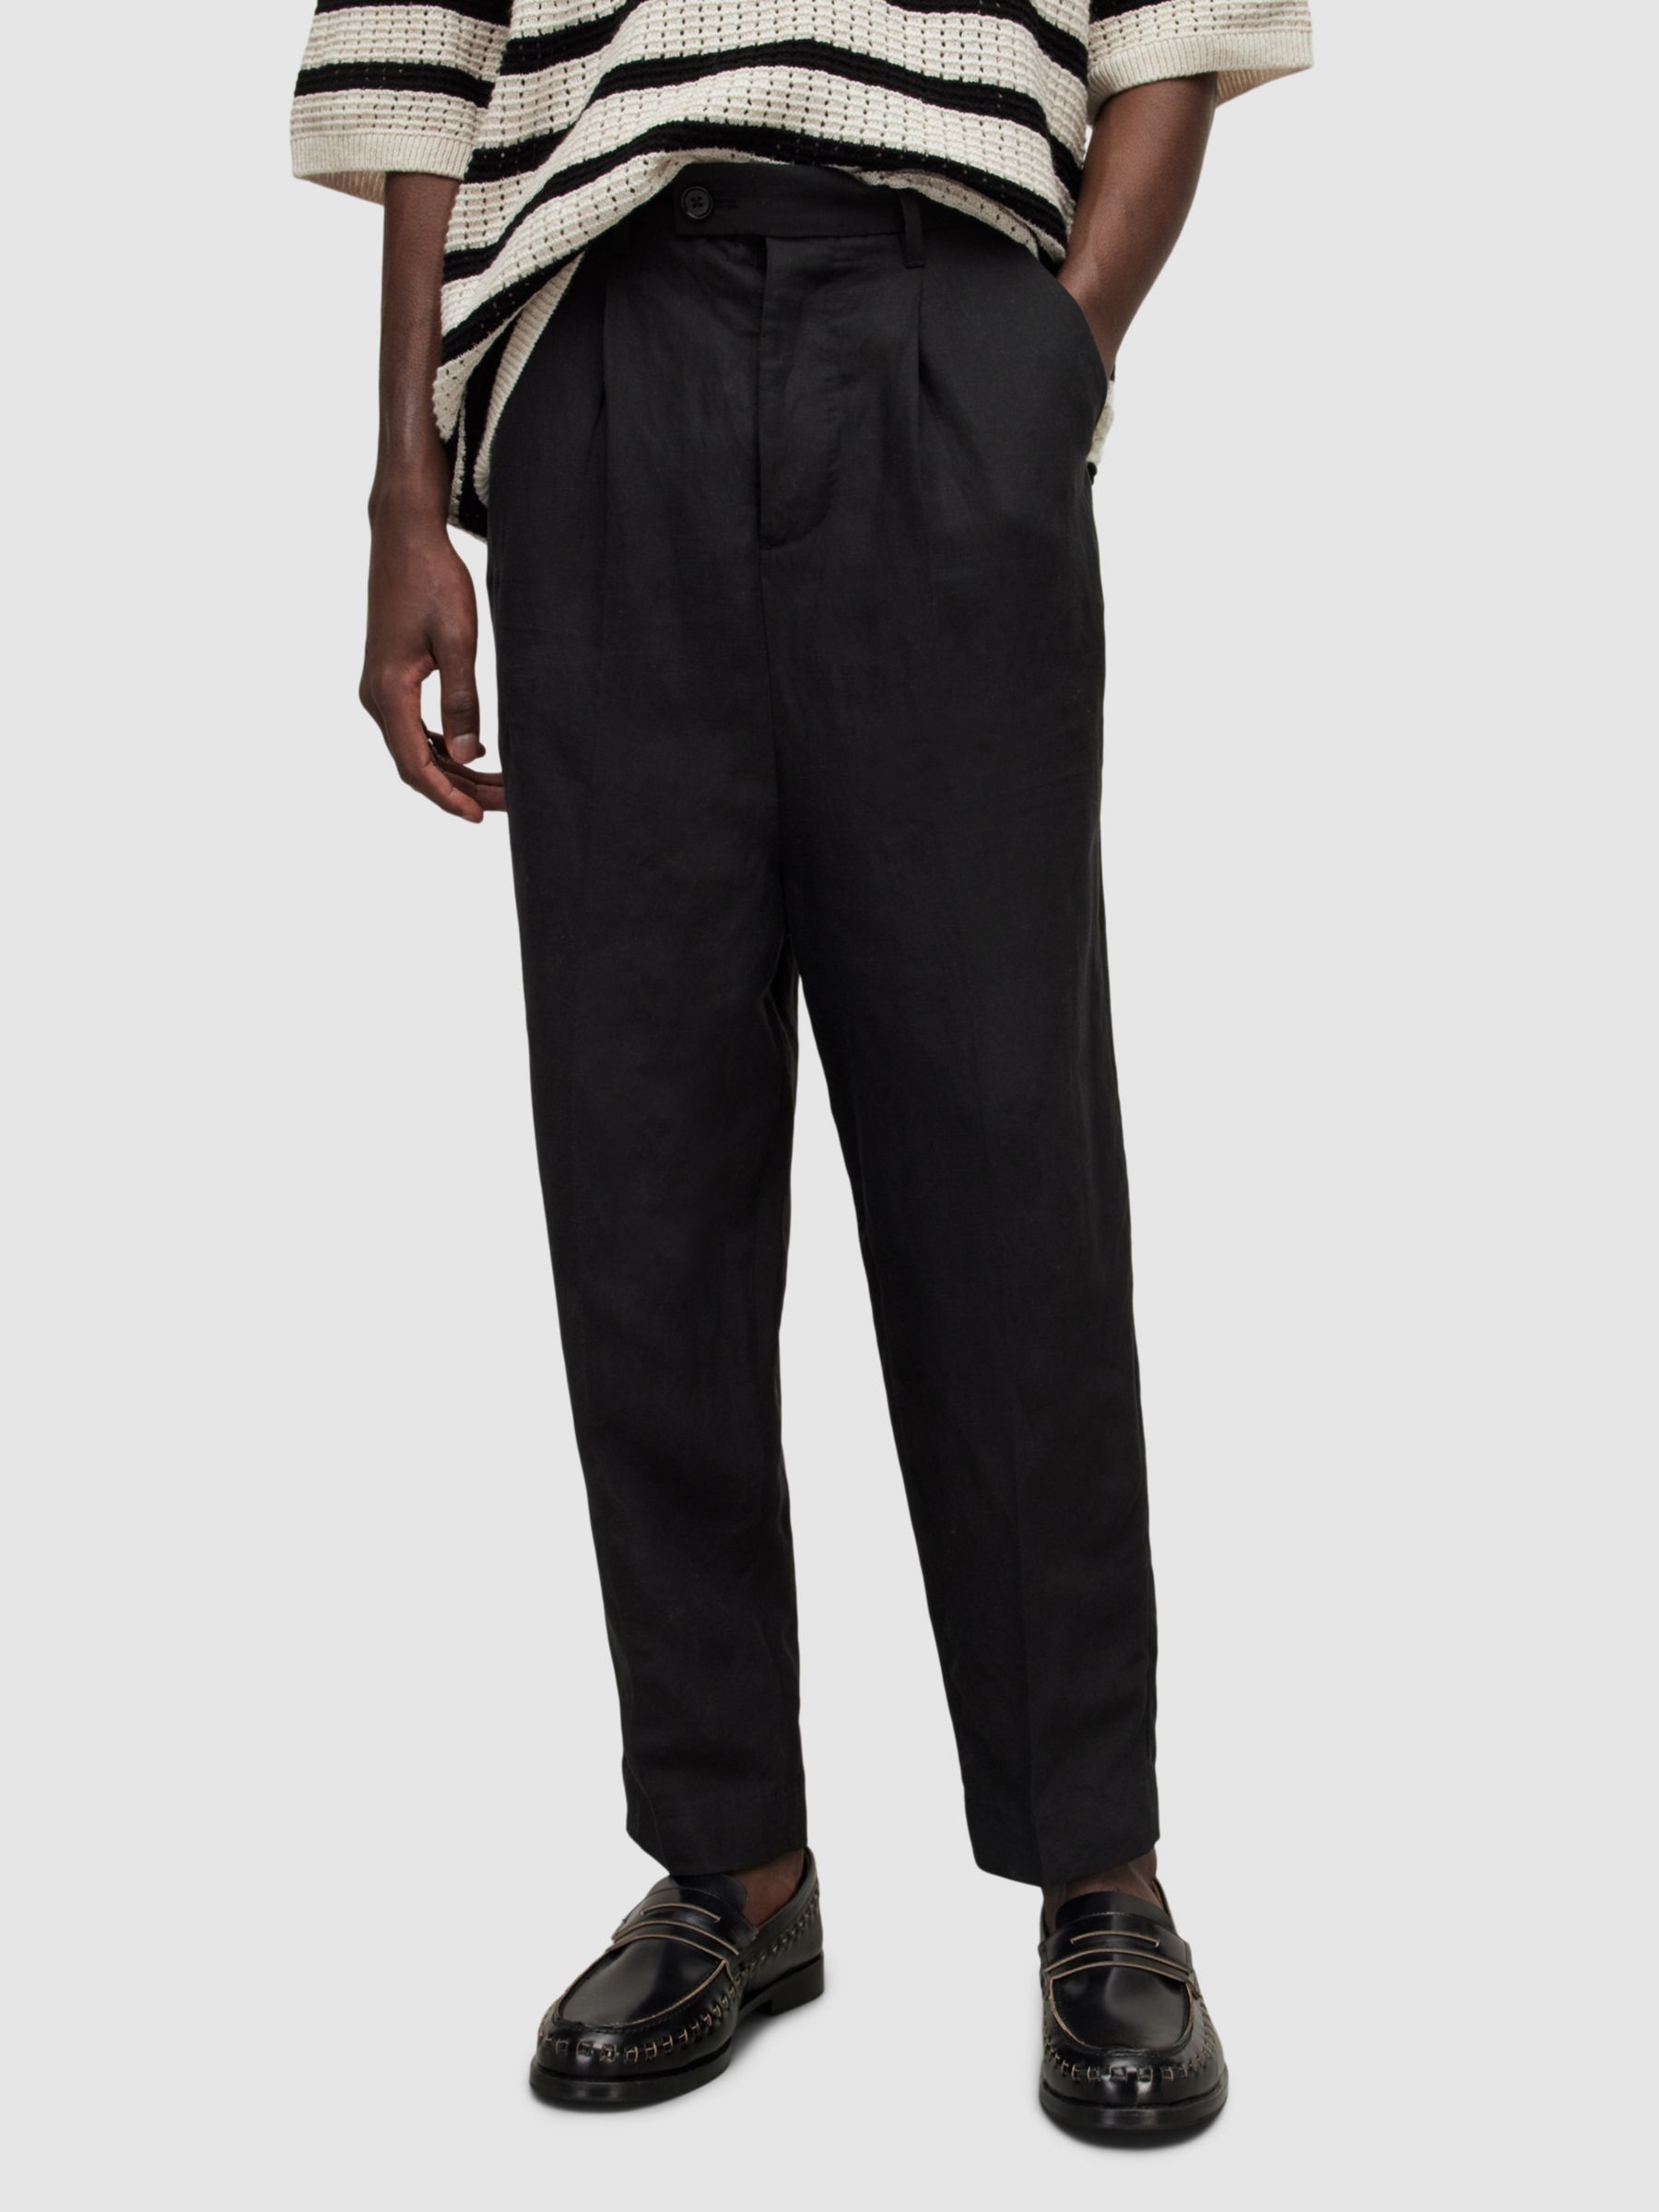 AllSaints Pace Tapered Crop Trousers, Black